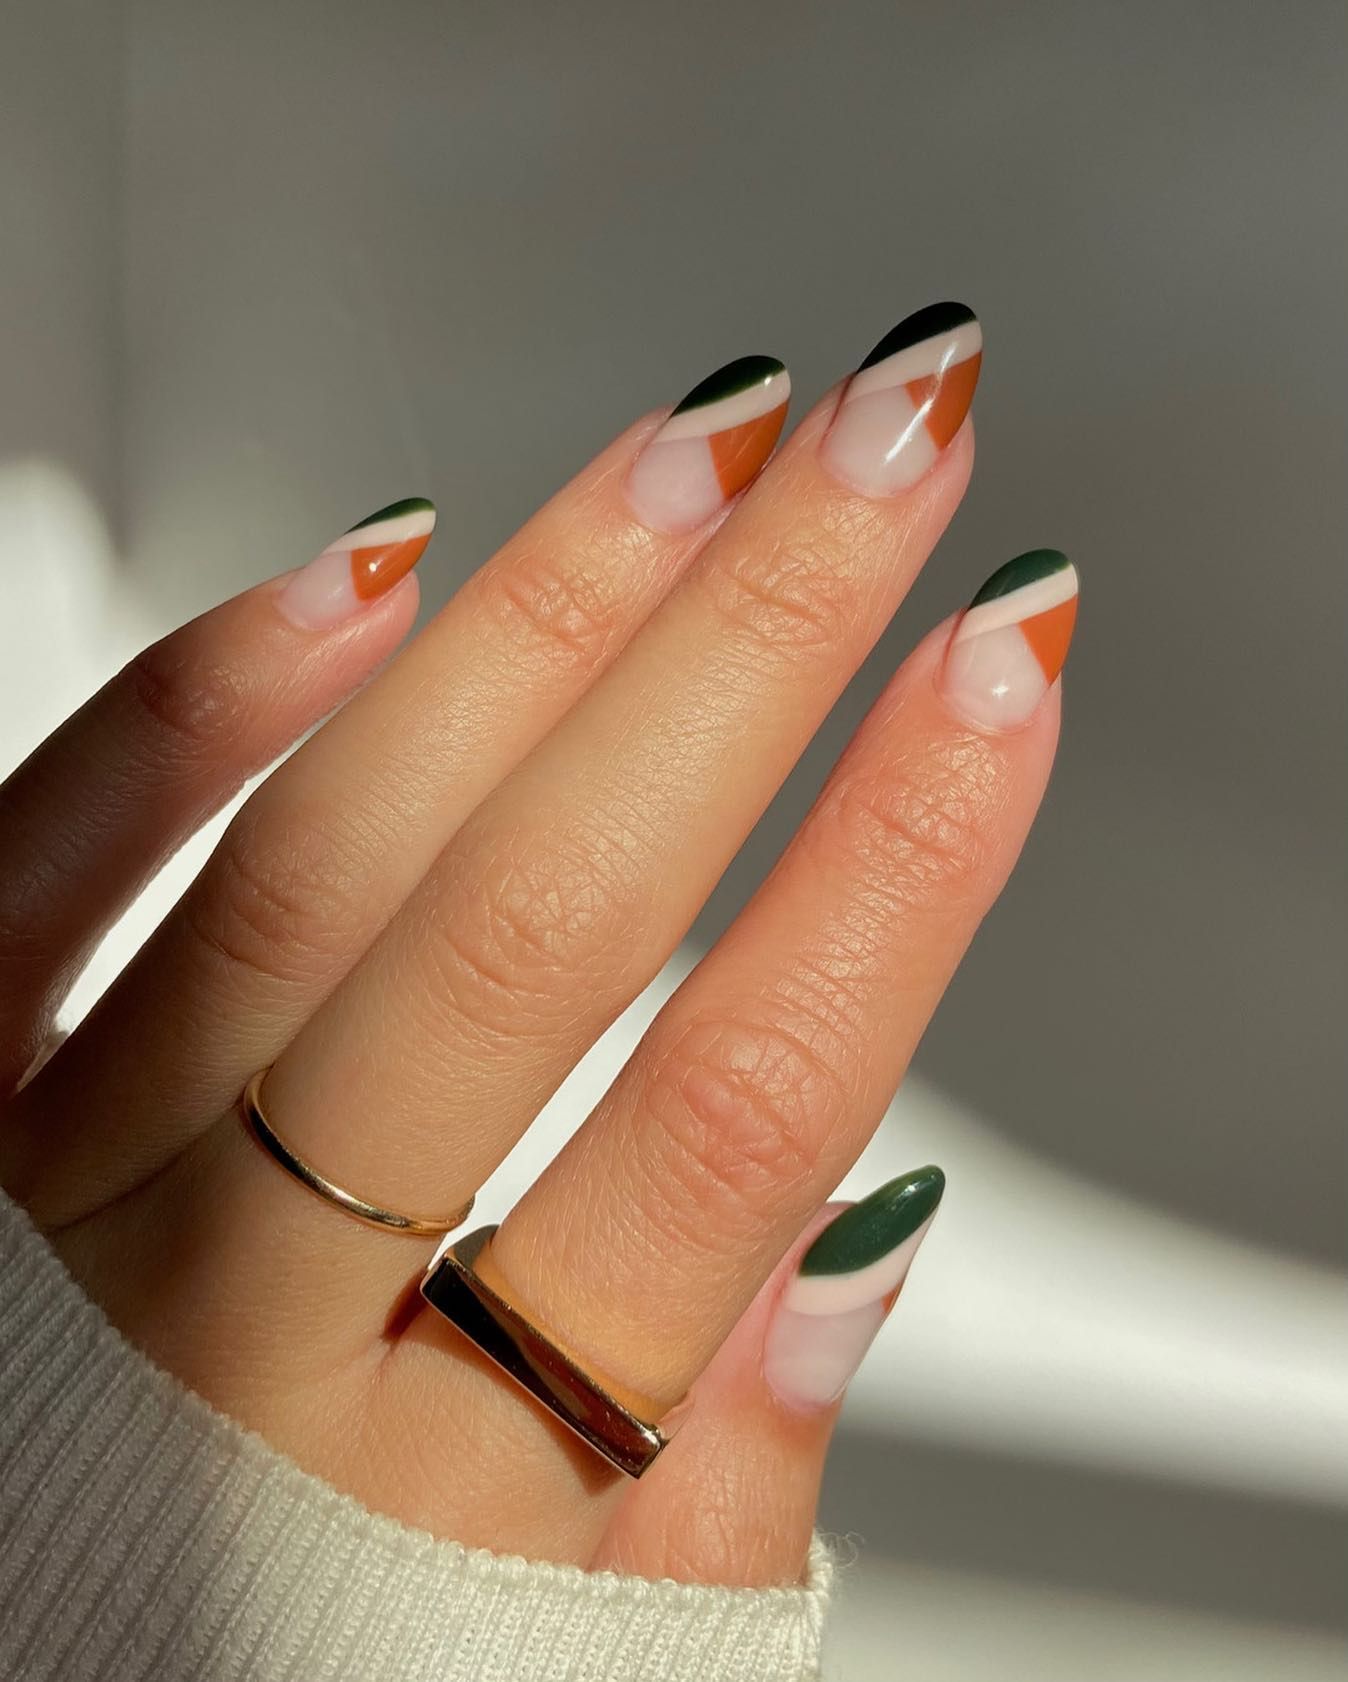 Burberry nails | Burberry nails, Sweater nails, Plaid nails